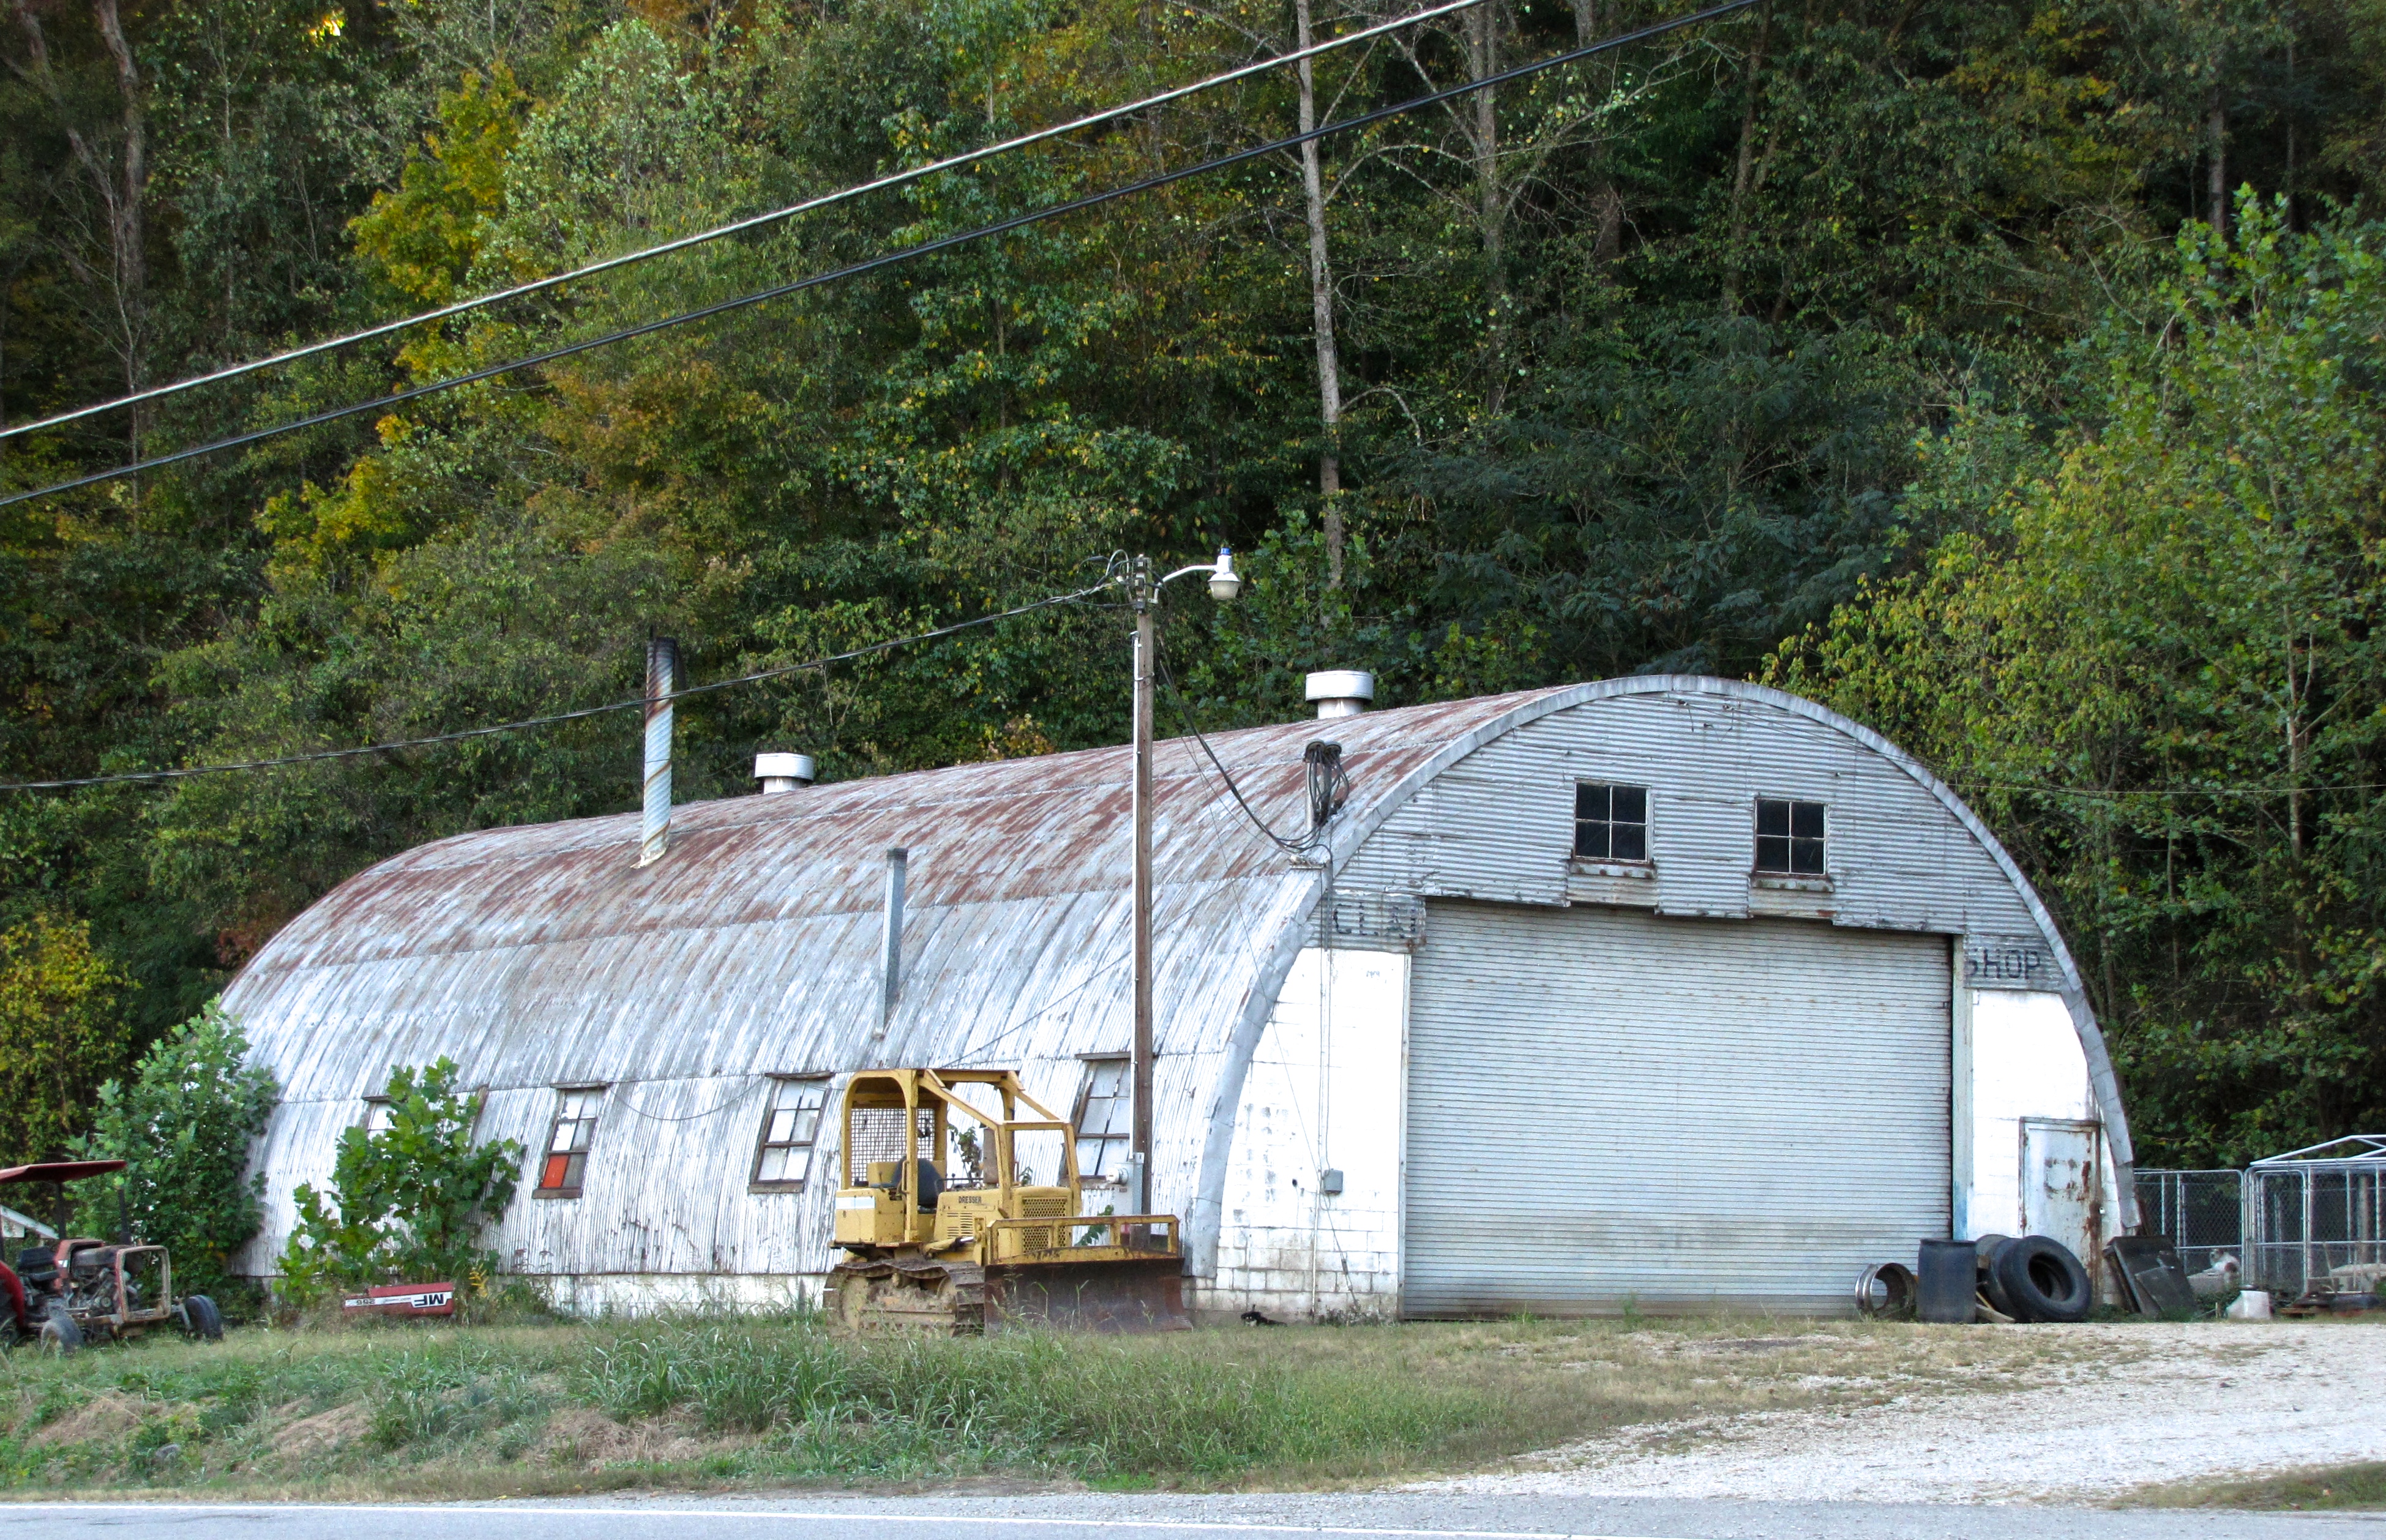 quonset hut in Mendon, MA